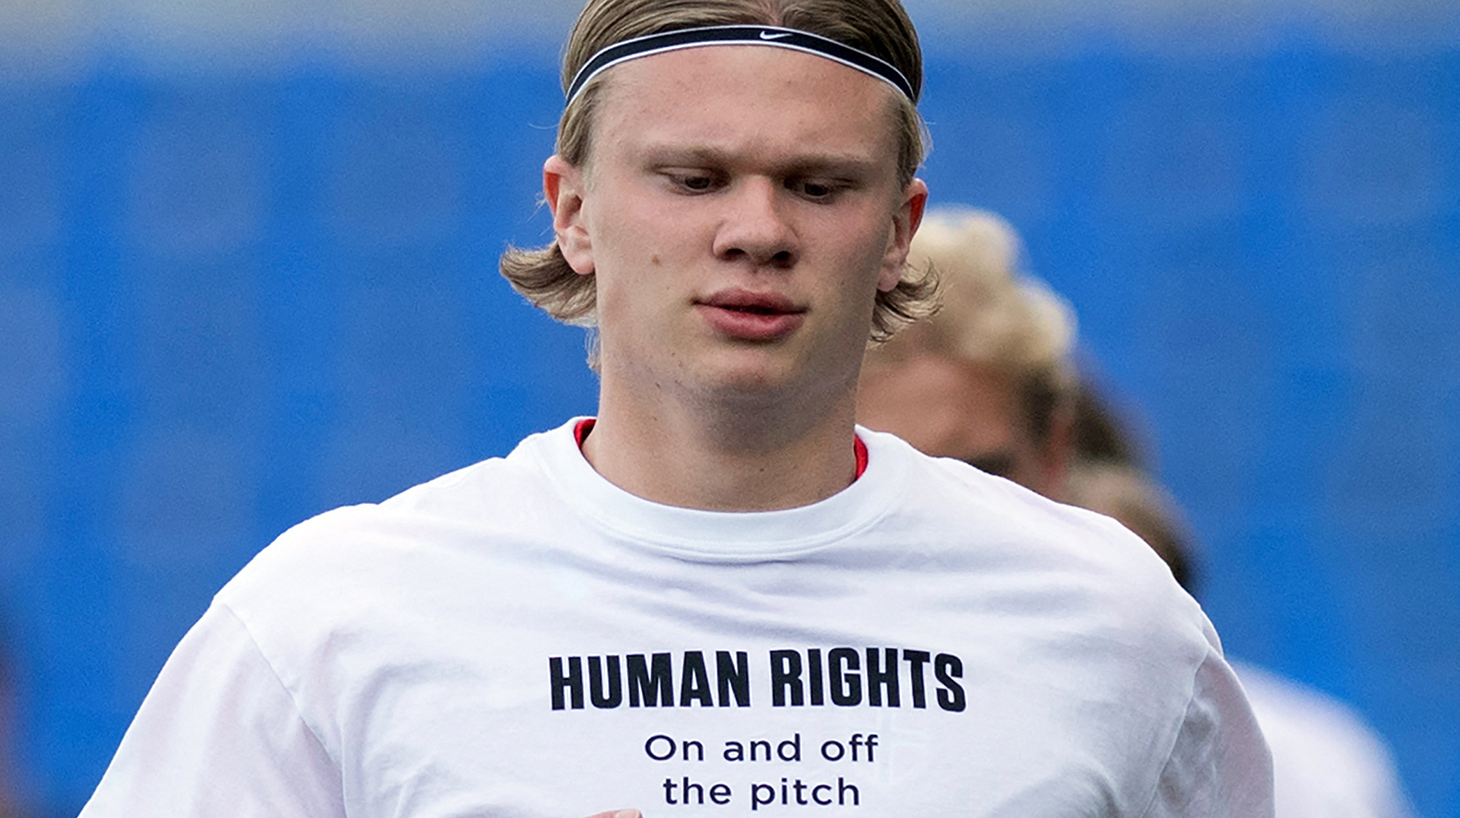 Norway's forward Erling Braut Haaland wears a t-shirt with the slogan 'Human rights, on and off the pitch' as he warms up before the FIFA World Cup Qatar 2022 qualification football match between Norway and Turkey at La Rosaleda stadium in Malaga on March 27, 2021